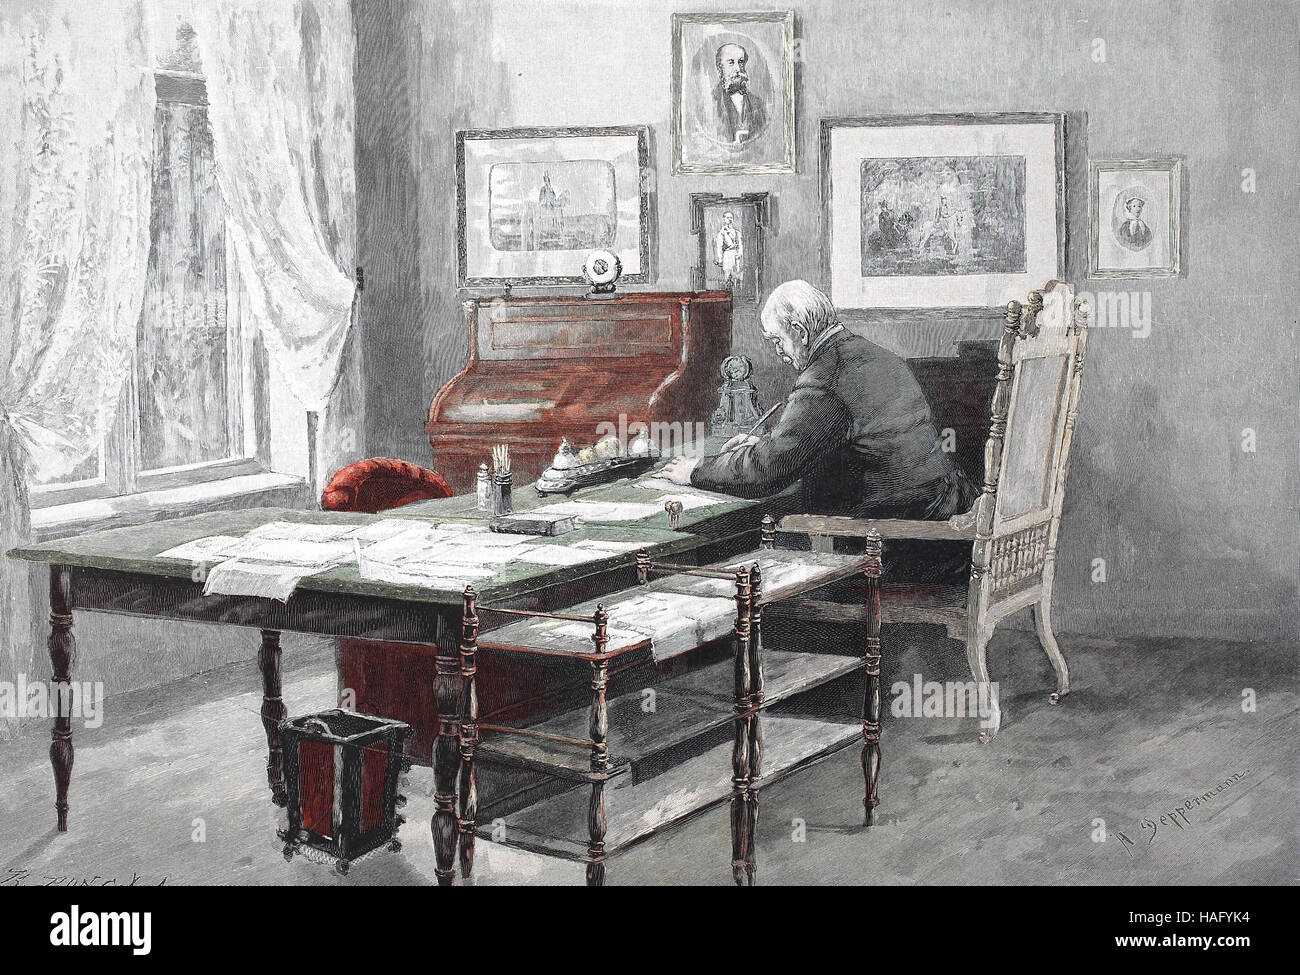 Otto Eduard Leopold, Prince of Bismarck, Duke of Lauenburg, 1 April 1815 - 30 July 1898, known as Otto von Bismarck, was a conservative Prussian statesman, here in his office in Berlin, Friedrichsruh, Germany, woodcut from the year 1880 Stock Photo